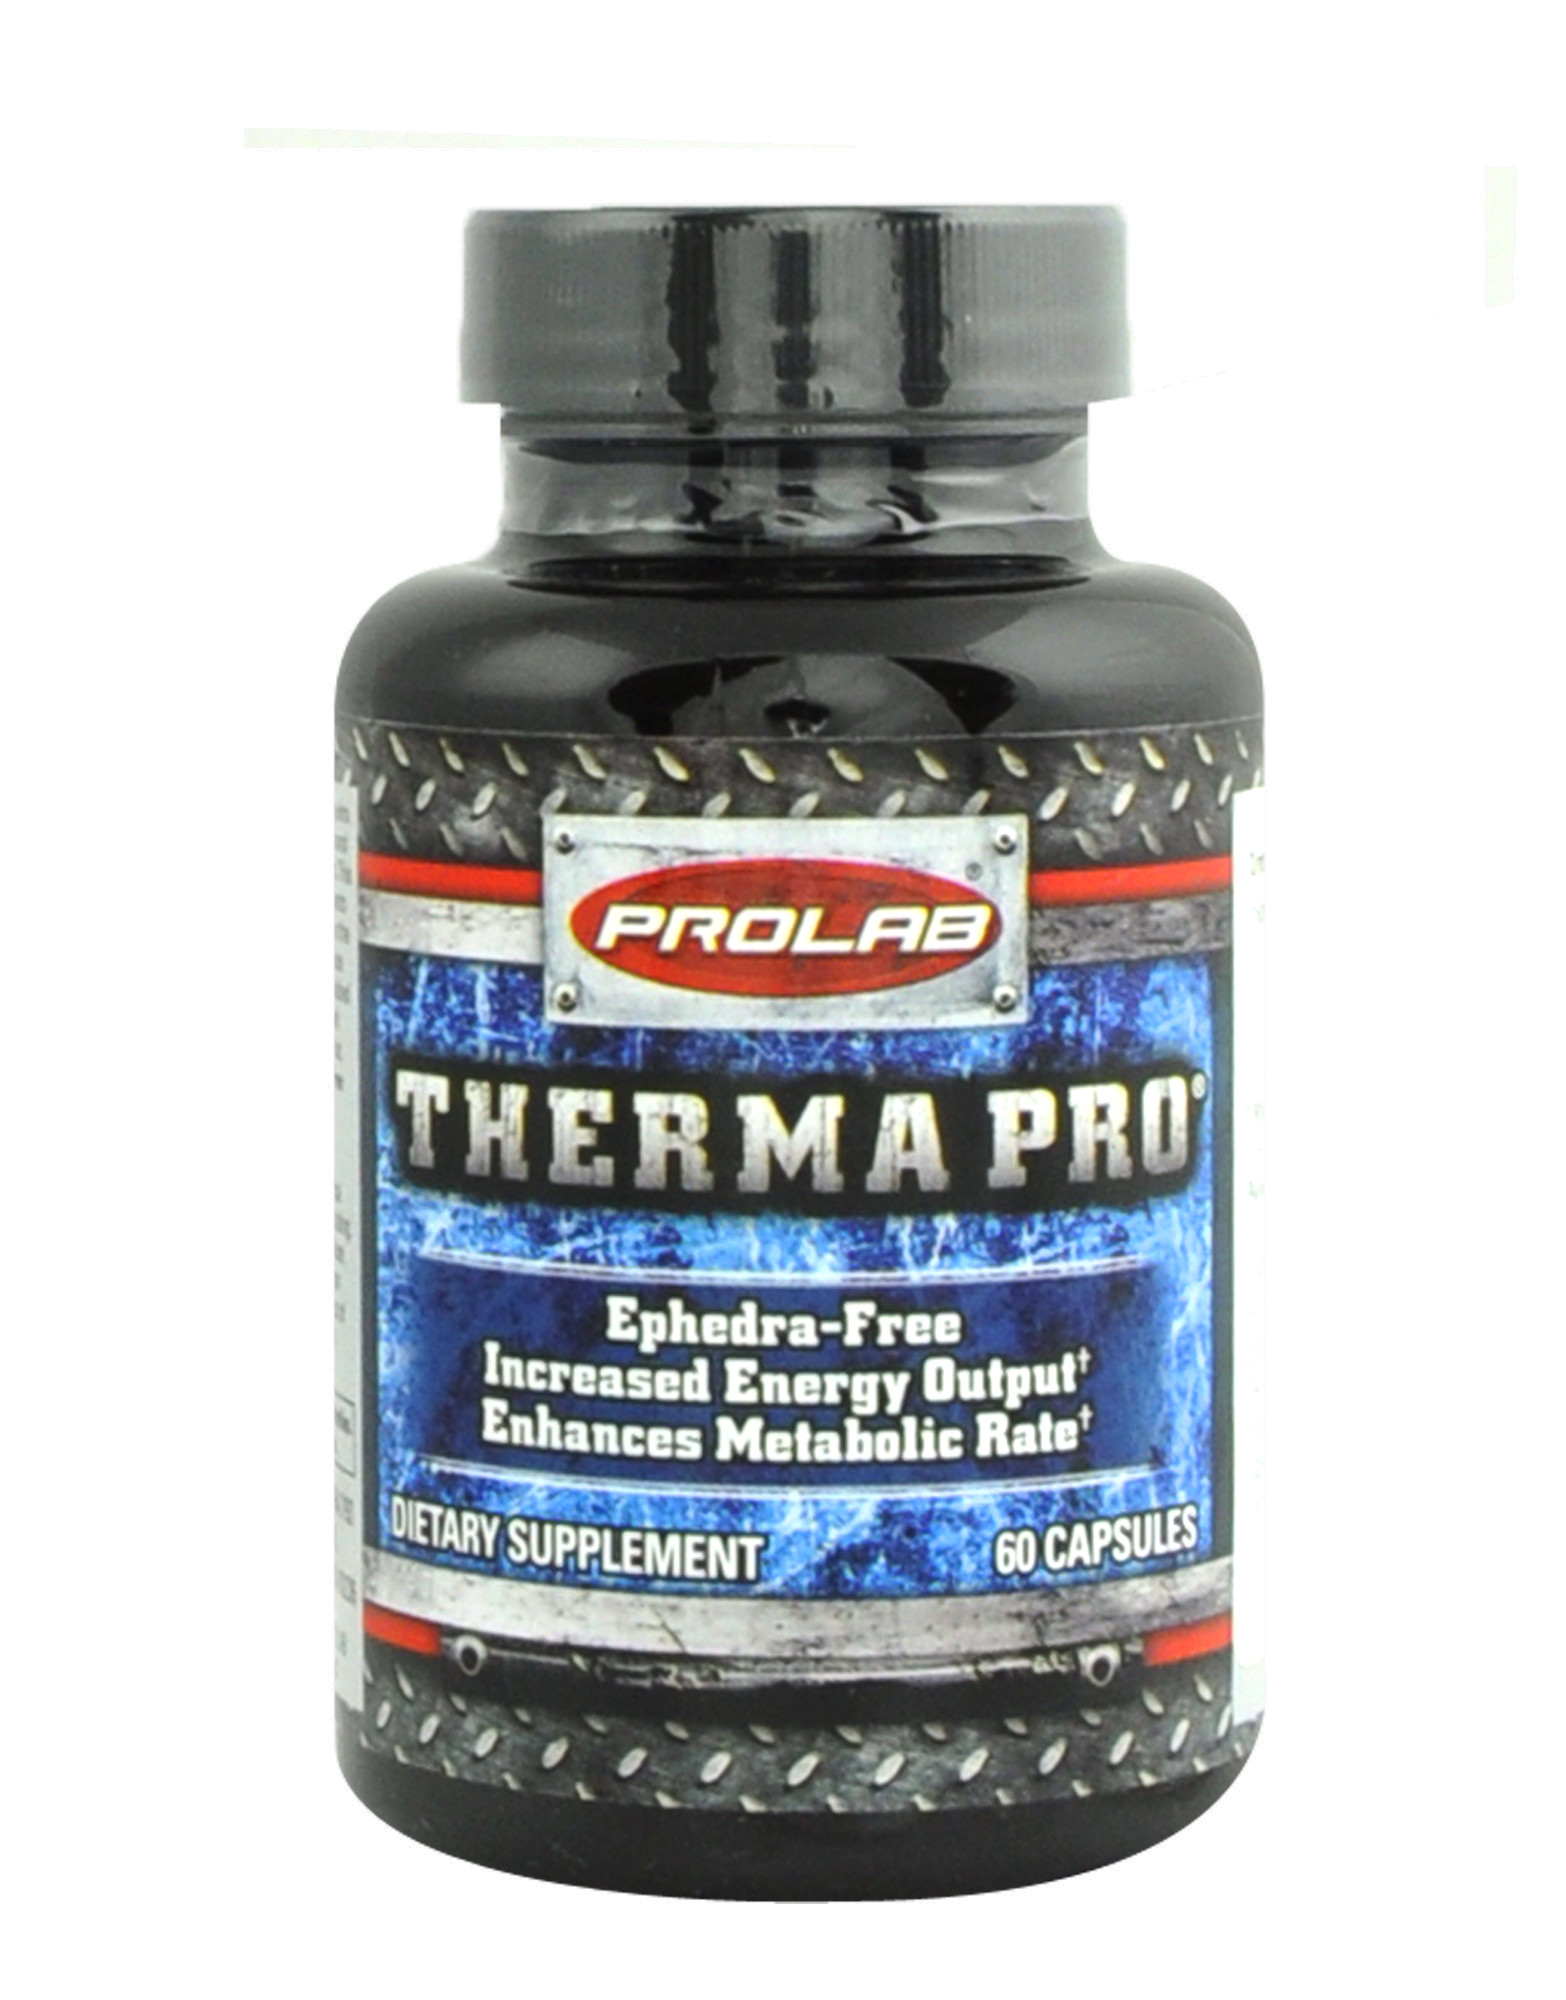 Therma Pro by Prolab usa, 60 capsules 